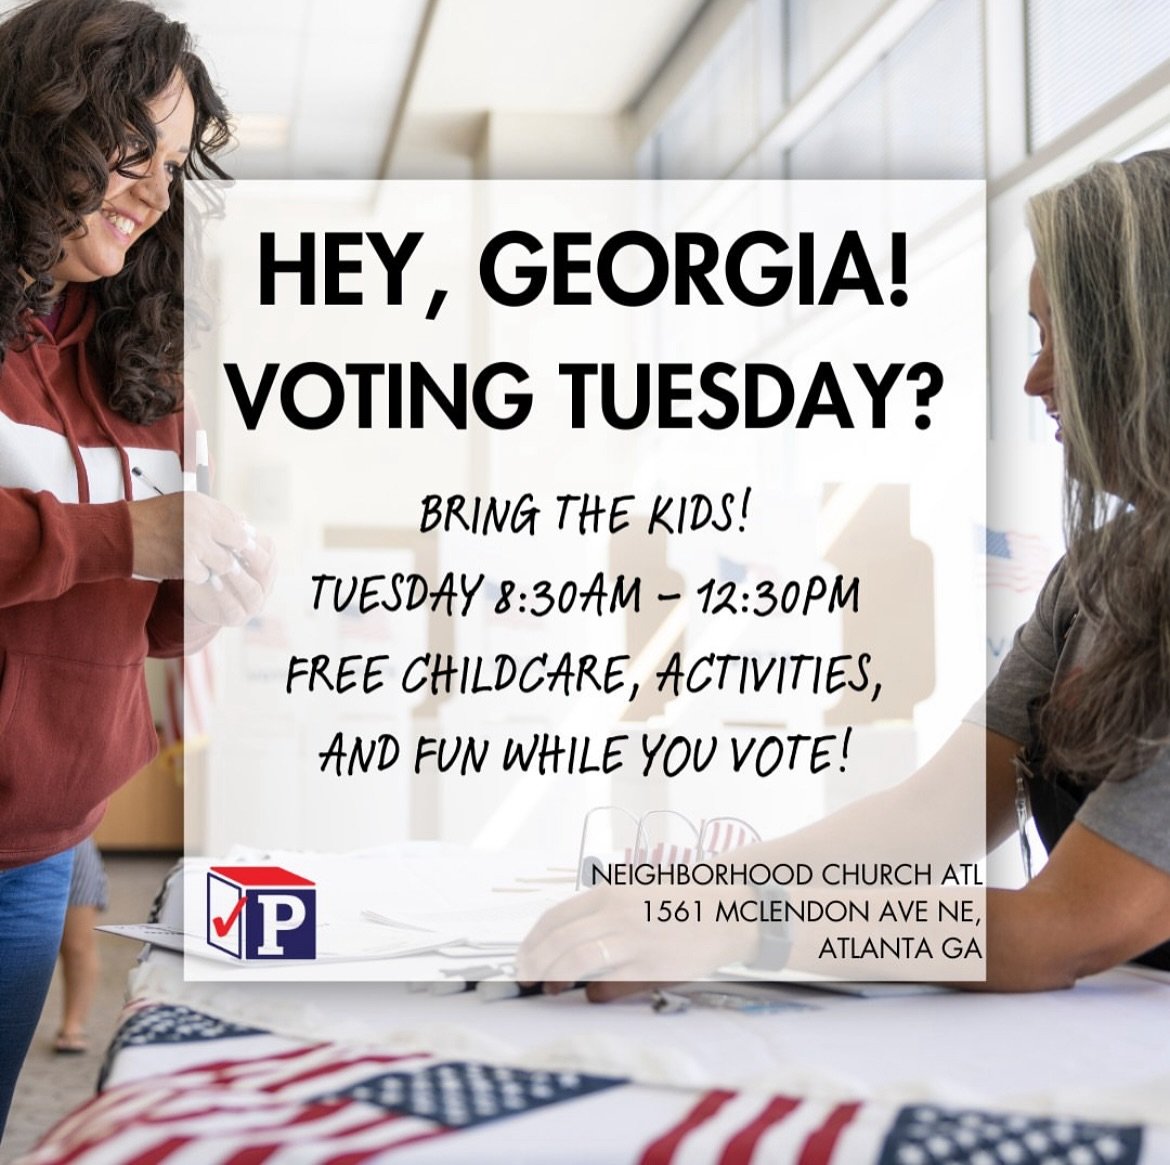 Friends and neighbors! If you&rsquo;re polling place is Neighborhood Church and you haven&rsquo;t voted yet, come on out Tuesday from 8:30 AM until 12:30 PM and bring your kids! 

Our partners at @politisitusa are providing childcare, activities, and